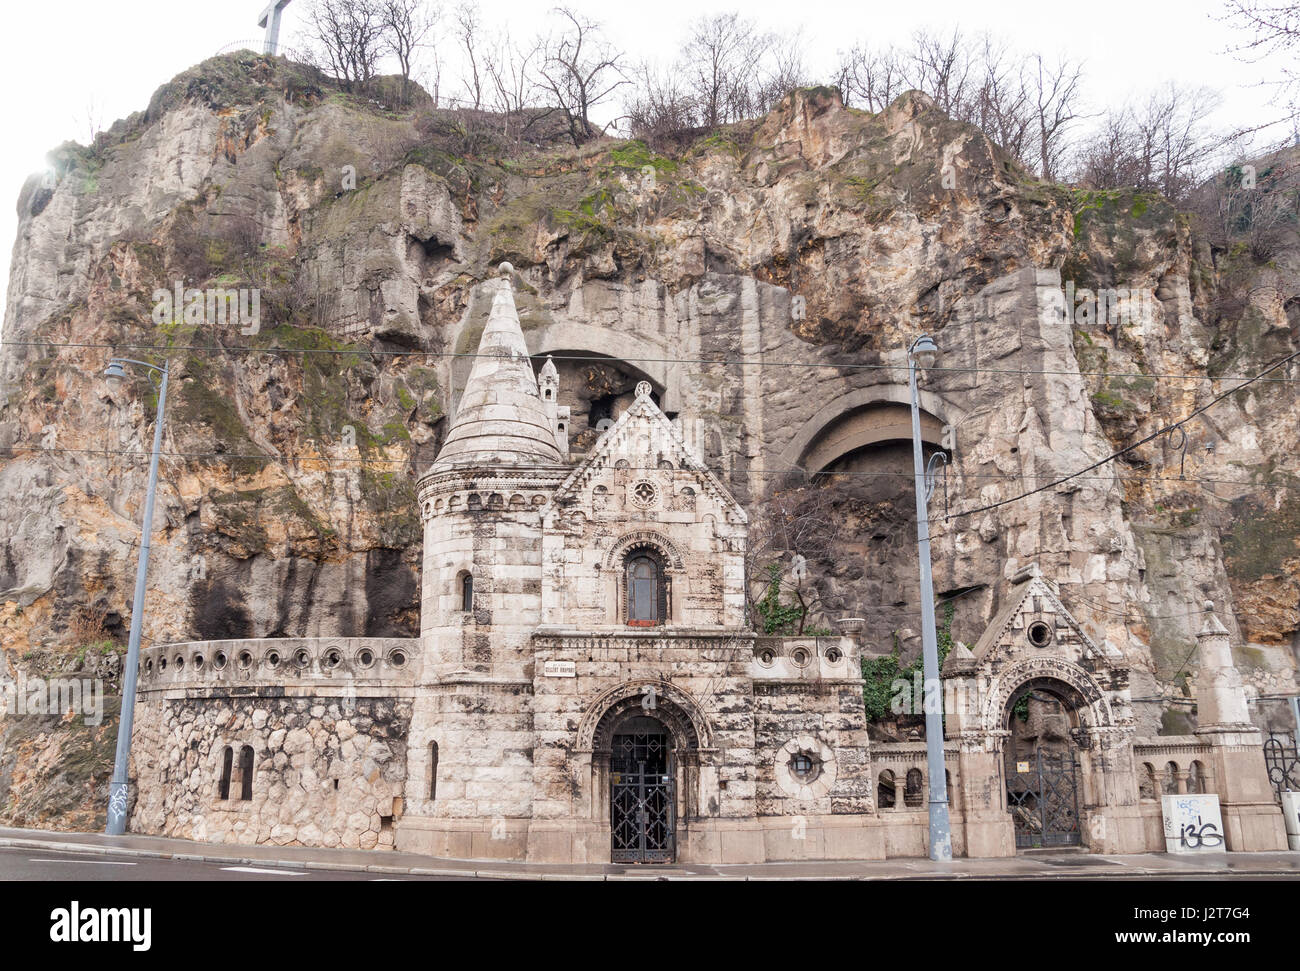 Facade of the Cave Church located inside Gellert Hill in Budapest, Hungary Stock Photo